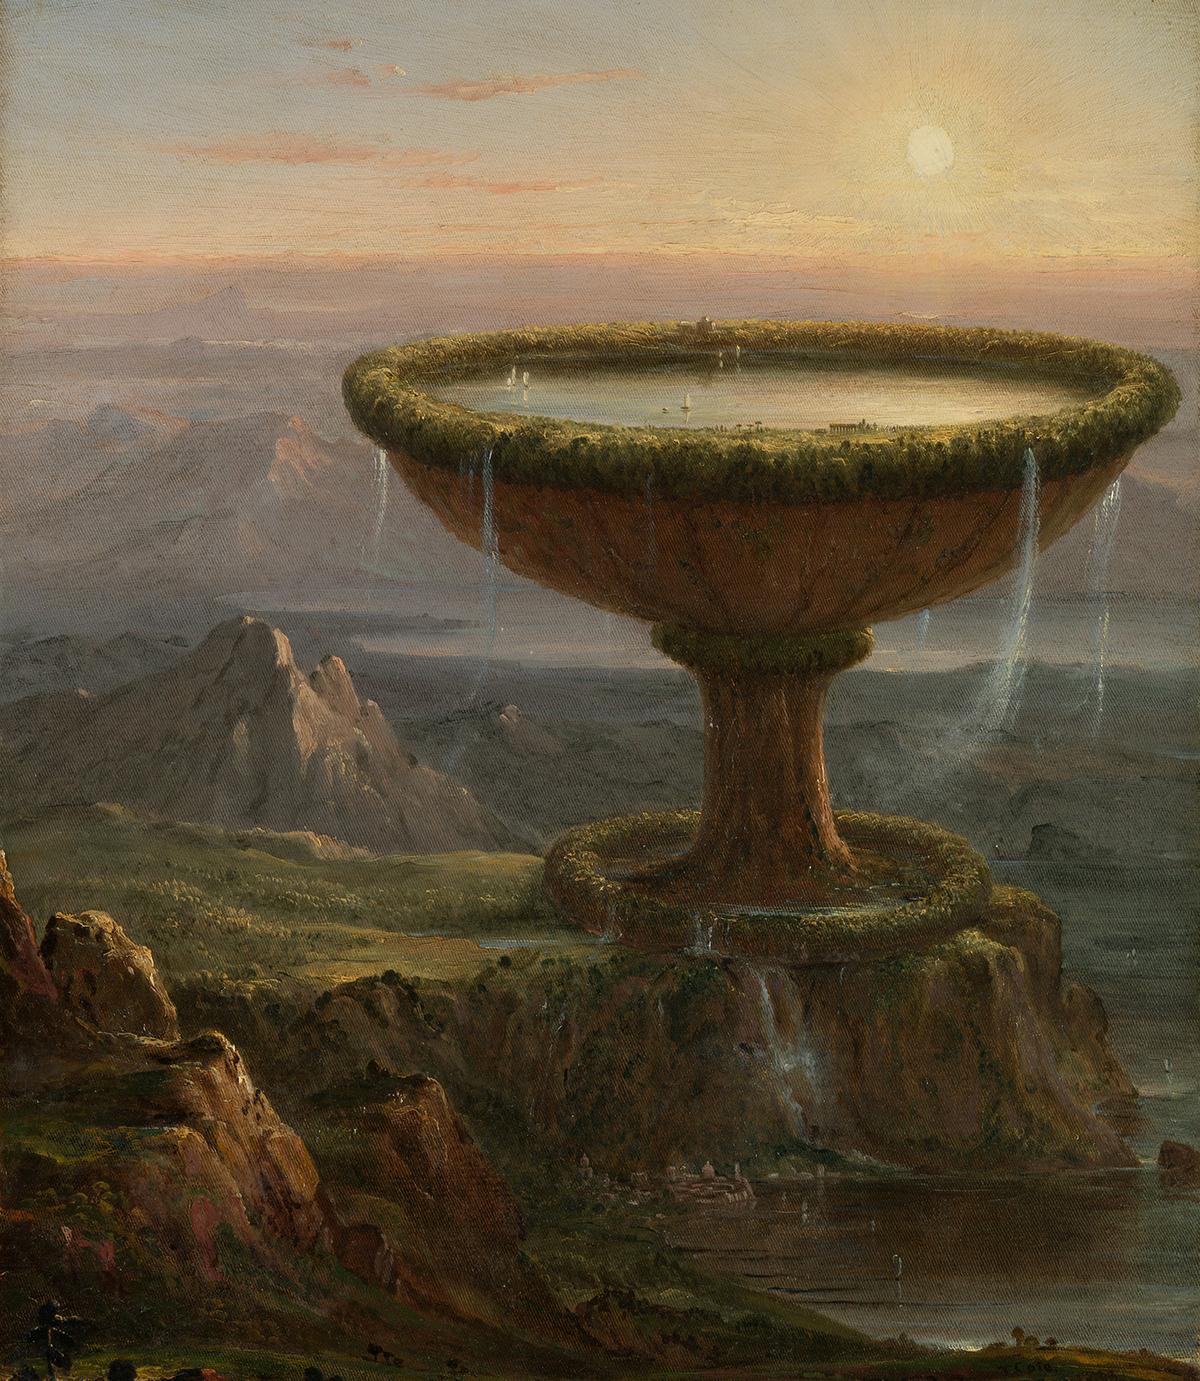 Thomas Cole’s painting, like perhaps the Bermudas do, represents a microcosmic, utopian culture contained in the giant chalice. "The Titan's Goblet," 1833, by Thomas Cole. Oil on canvas. The Metropolitan Museum of Art, New York City. (Public Domain)